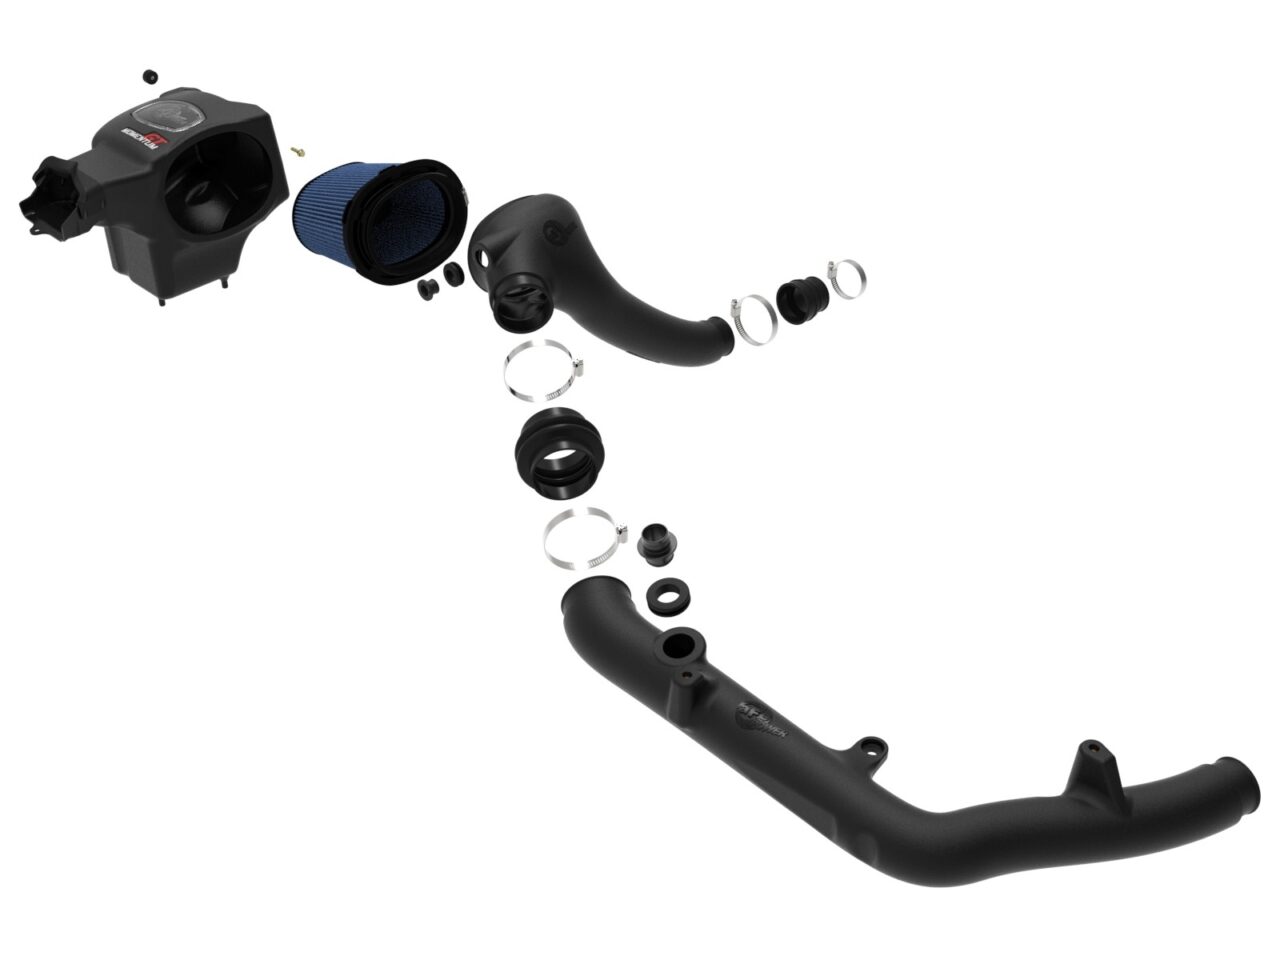 Exploded view of all pieces for aFe Bronco V6 intake system including blue oiled air filter, silicone couplings, hardware, and black tube and housing on white background